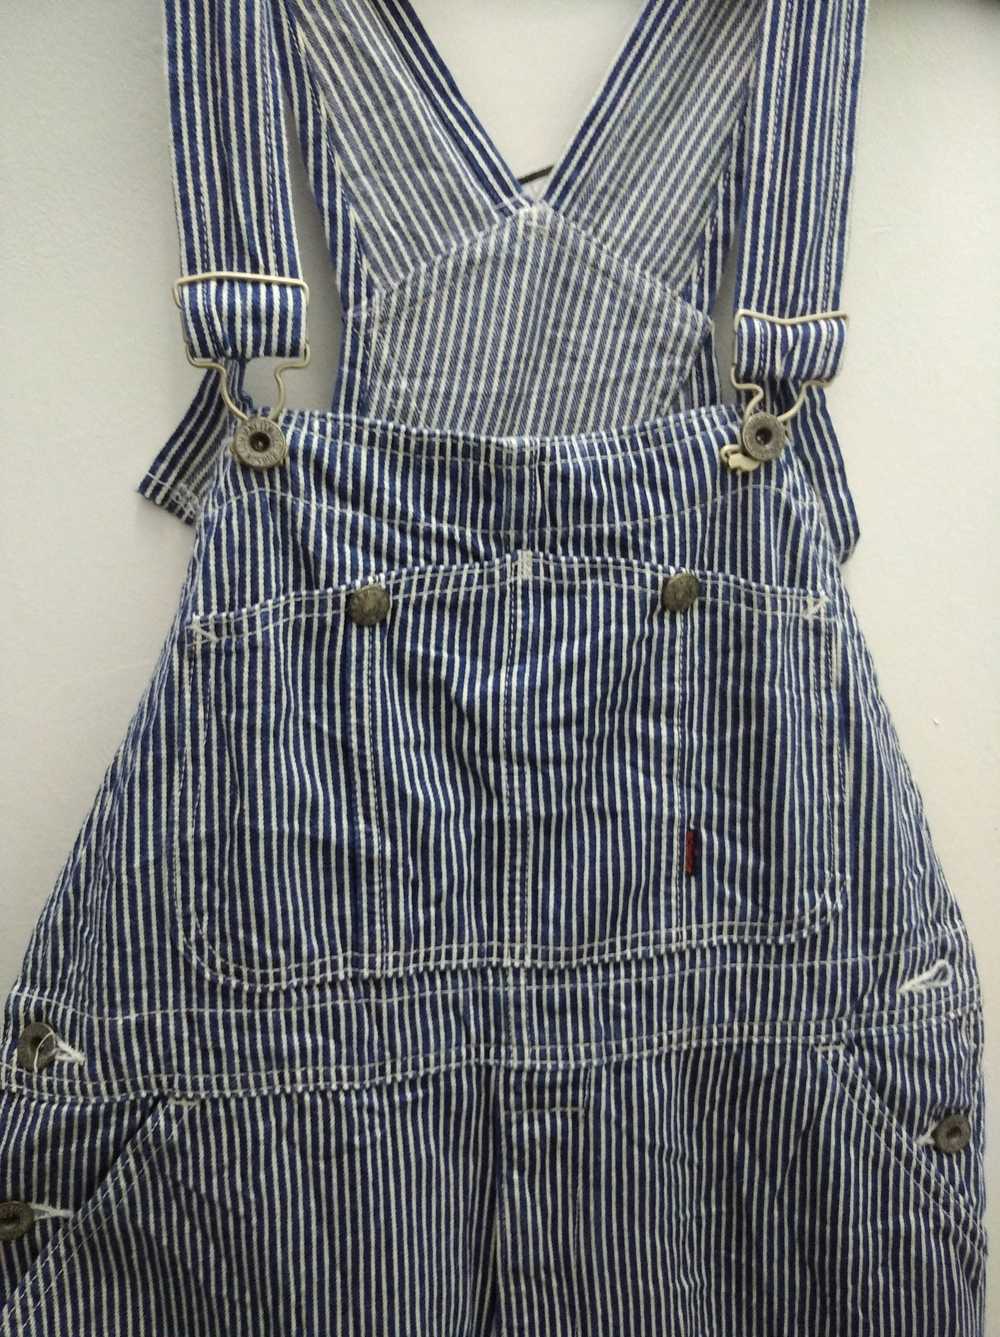 Japanese Brand × Overalls × Workers Vintage bobso… - image 10